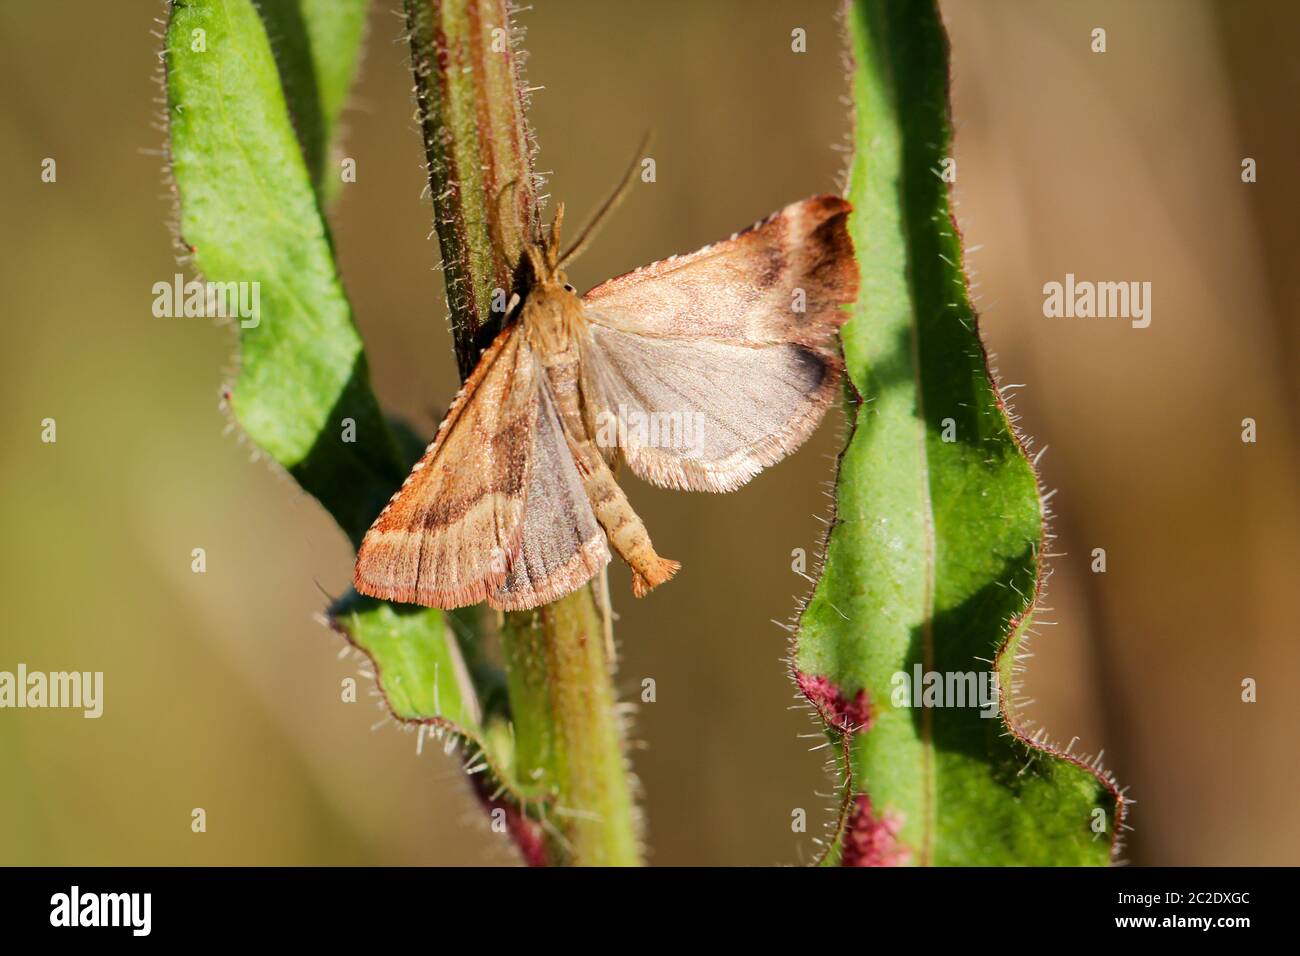 Nature background butterfly. Butterfly insect in nature. Nature insect butterfly on a flower plant. Butterfly in nature. Stock Photo